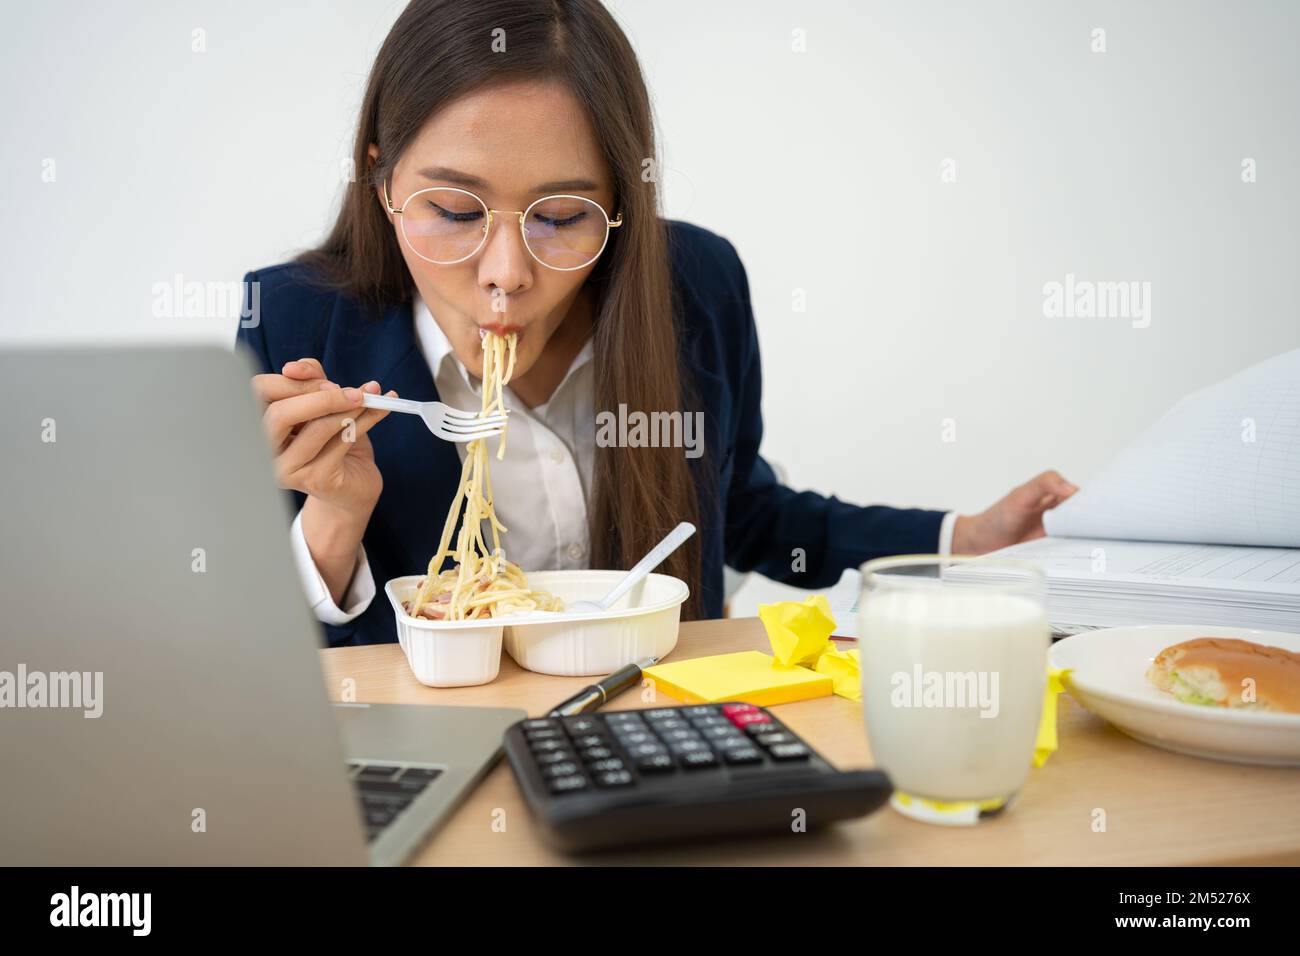 Busy and tired businesswoman eating spaghetti for lunch at the Desk office and working to deliver financial statements to a boss. Overworked and unhea Stock Photo